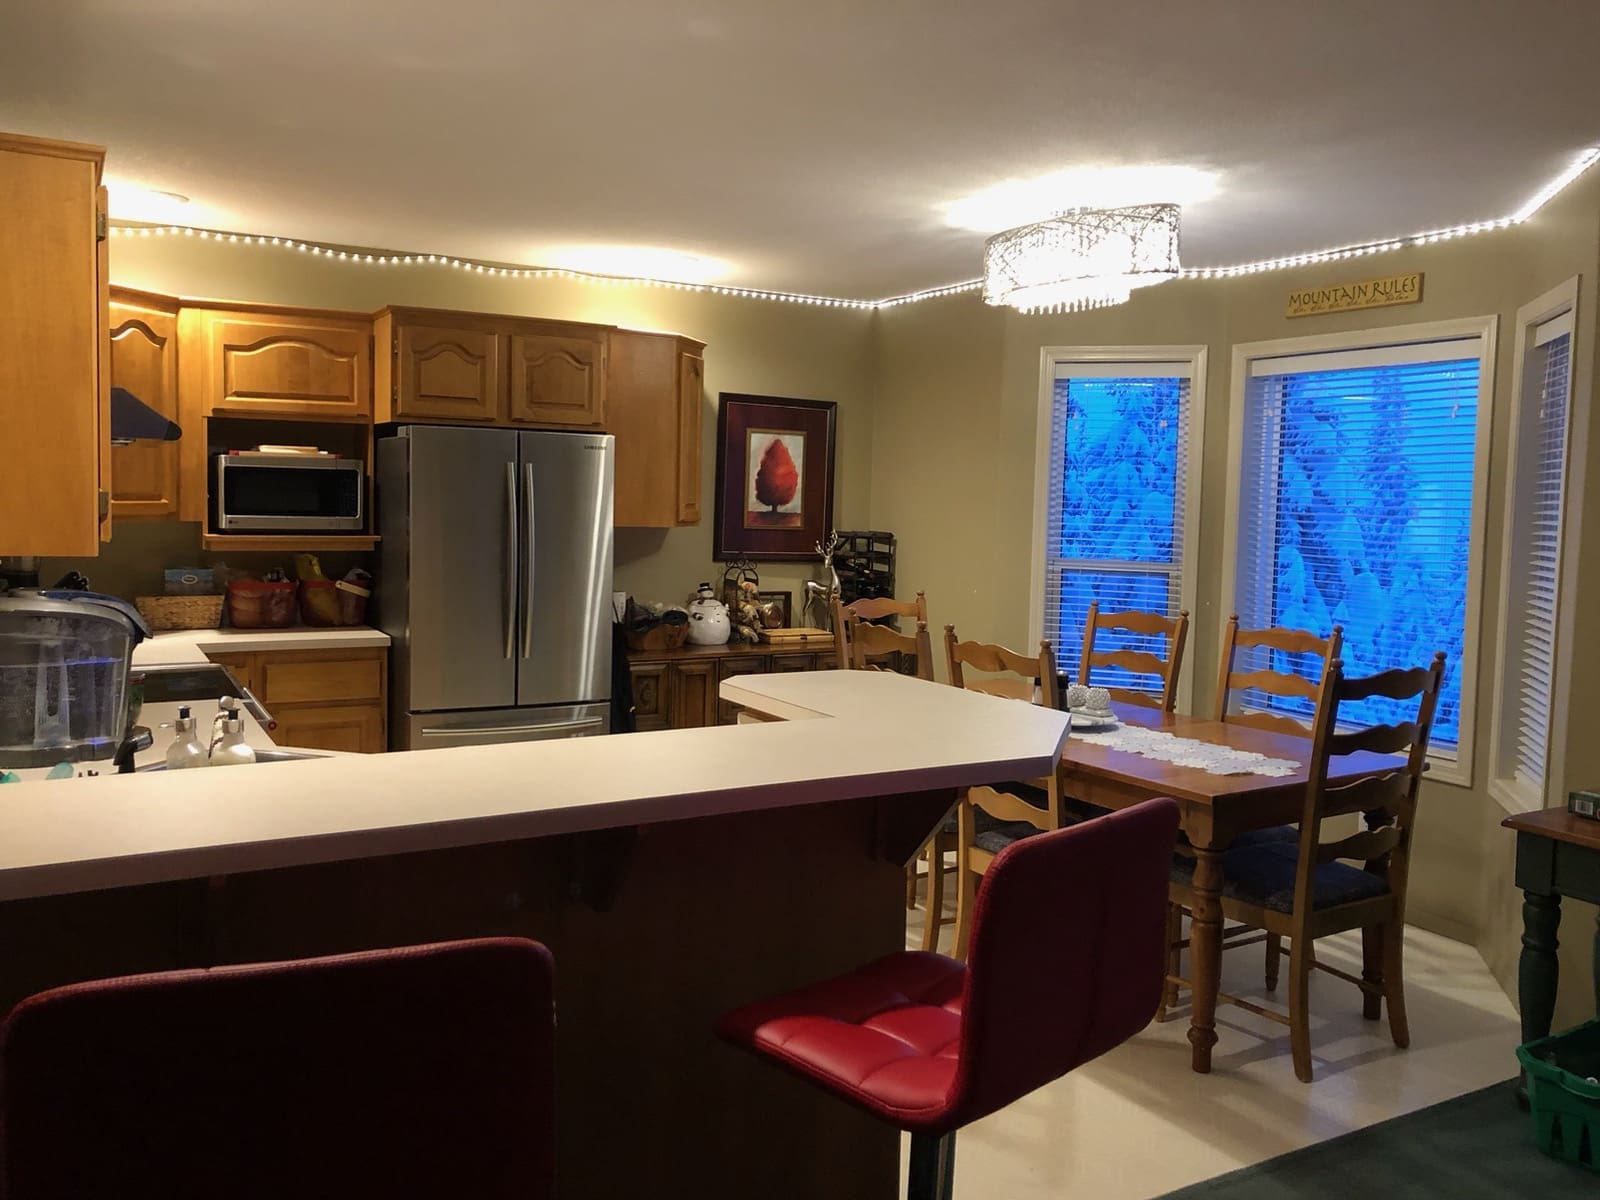 Cozy penthouse suite on the Knoll. Pet-friendly, private hot tub, laundry, large entryway for gear. Walk upstairs to large fully equipped kitchen, and open concept dining/living area.